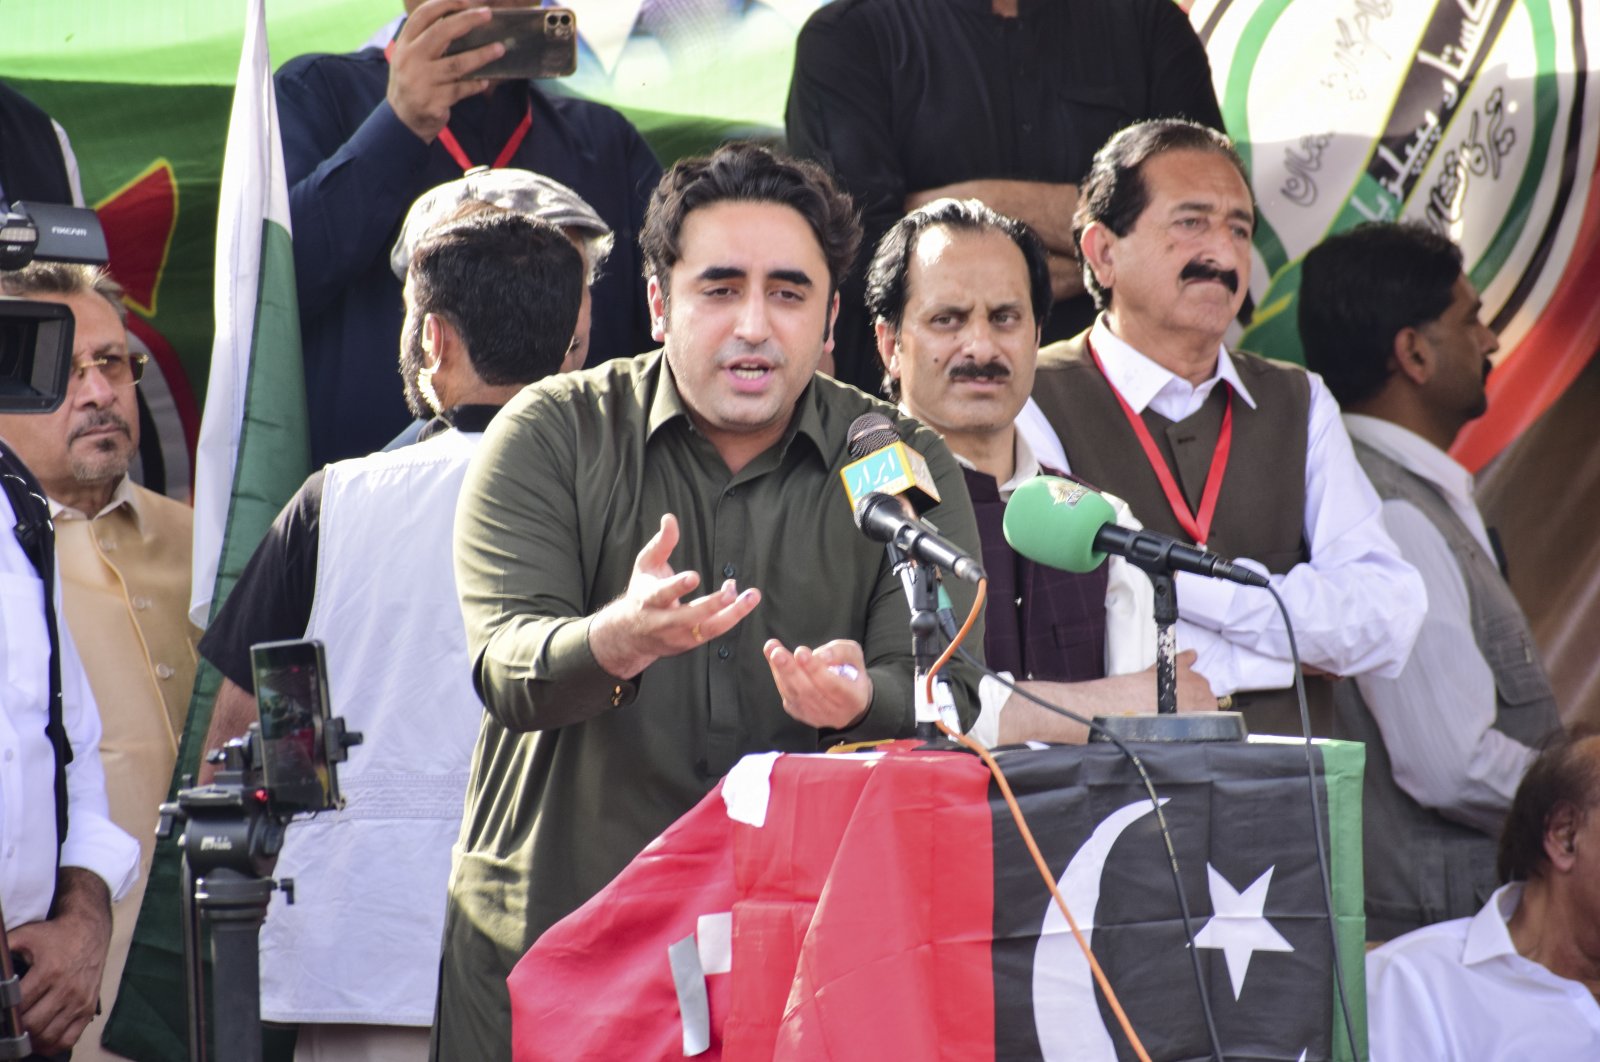 Pakistani Foreign Minister Bilawal Bhutto Zardari (C) speaks as he attends a protest against India for hosting in Srinagar the G20 Tourism meeting, in Bagh, Pakistani-administered Kashmir region, Pakistan, May 23, 2023. (EPA Photo)